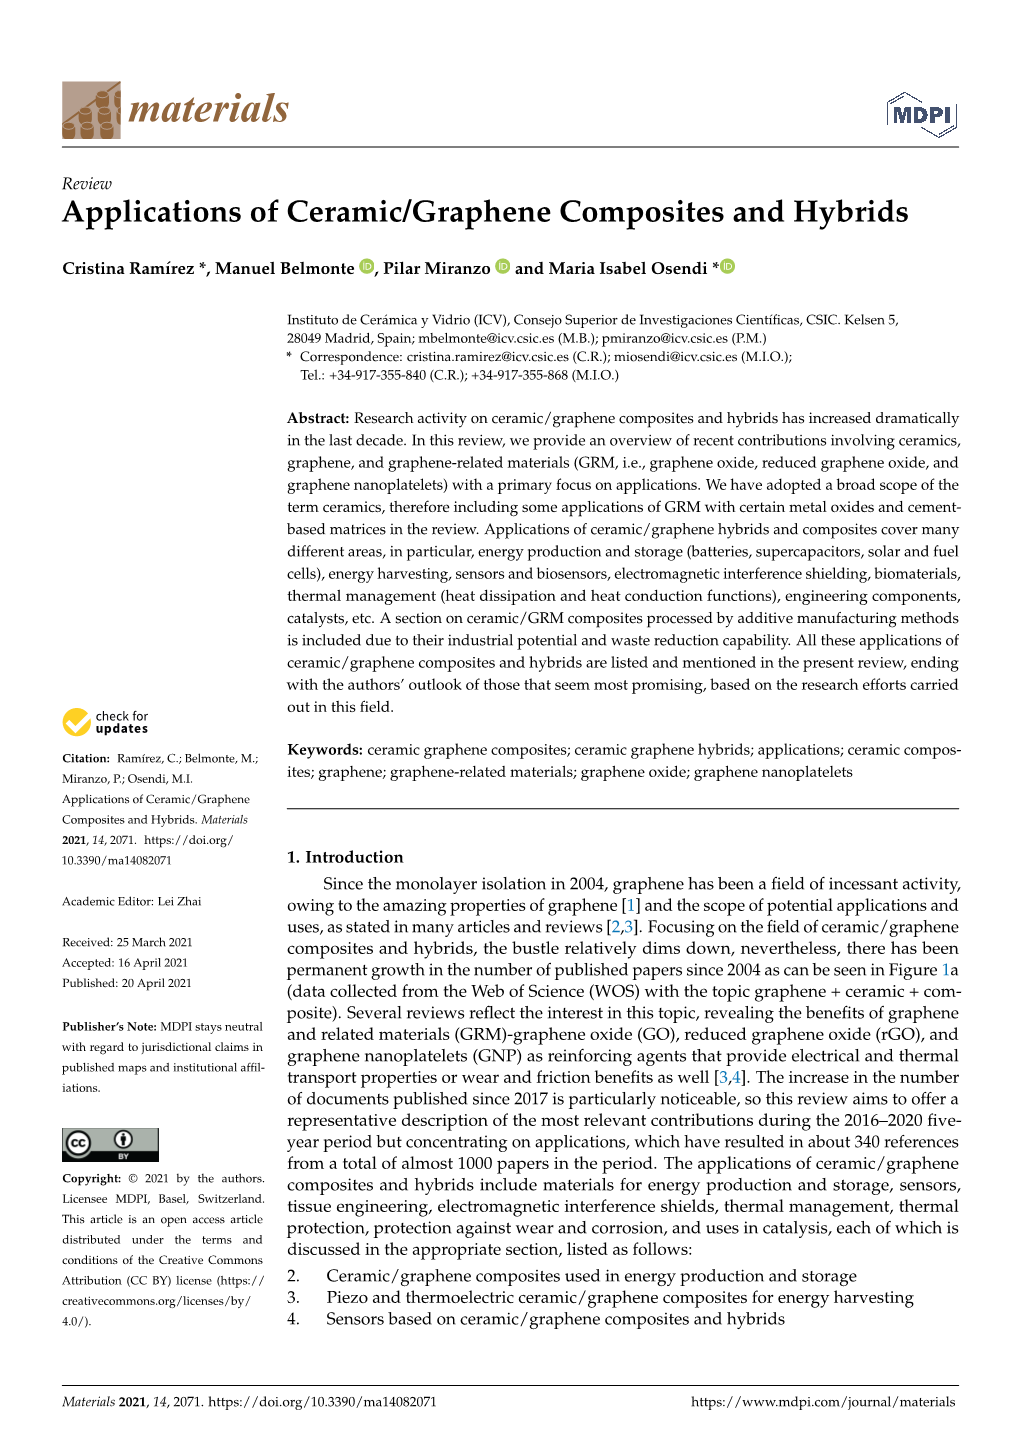 Applications of Ceramic/Graphene Composites and Hybrids